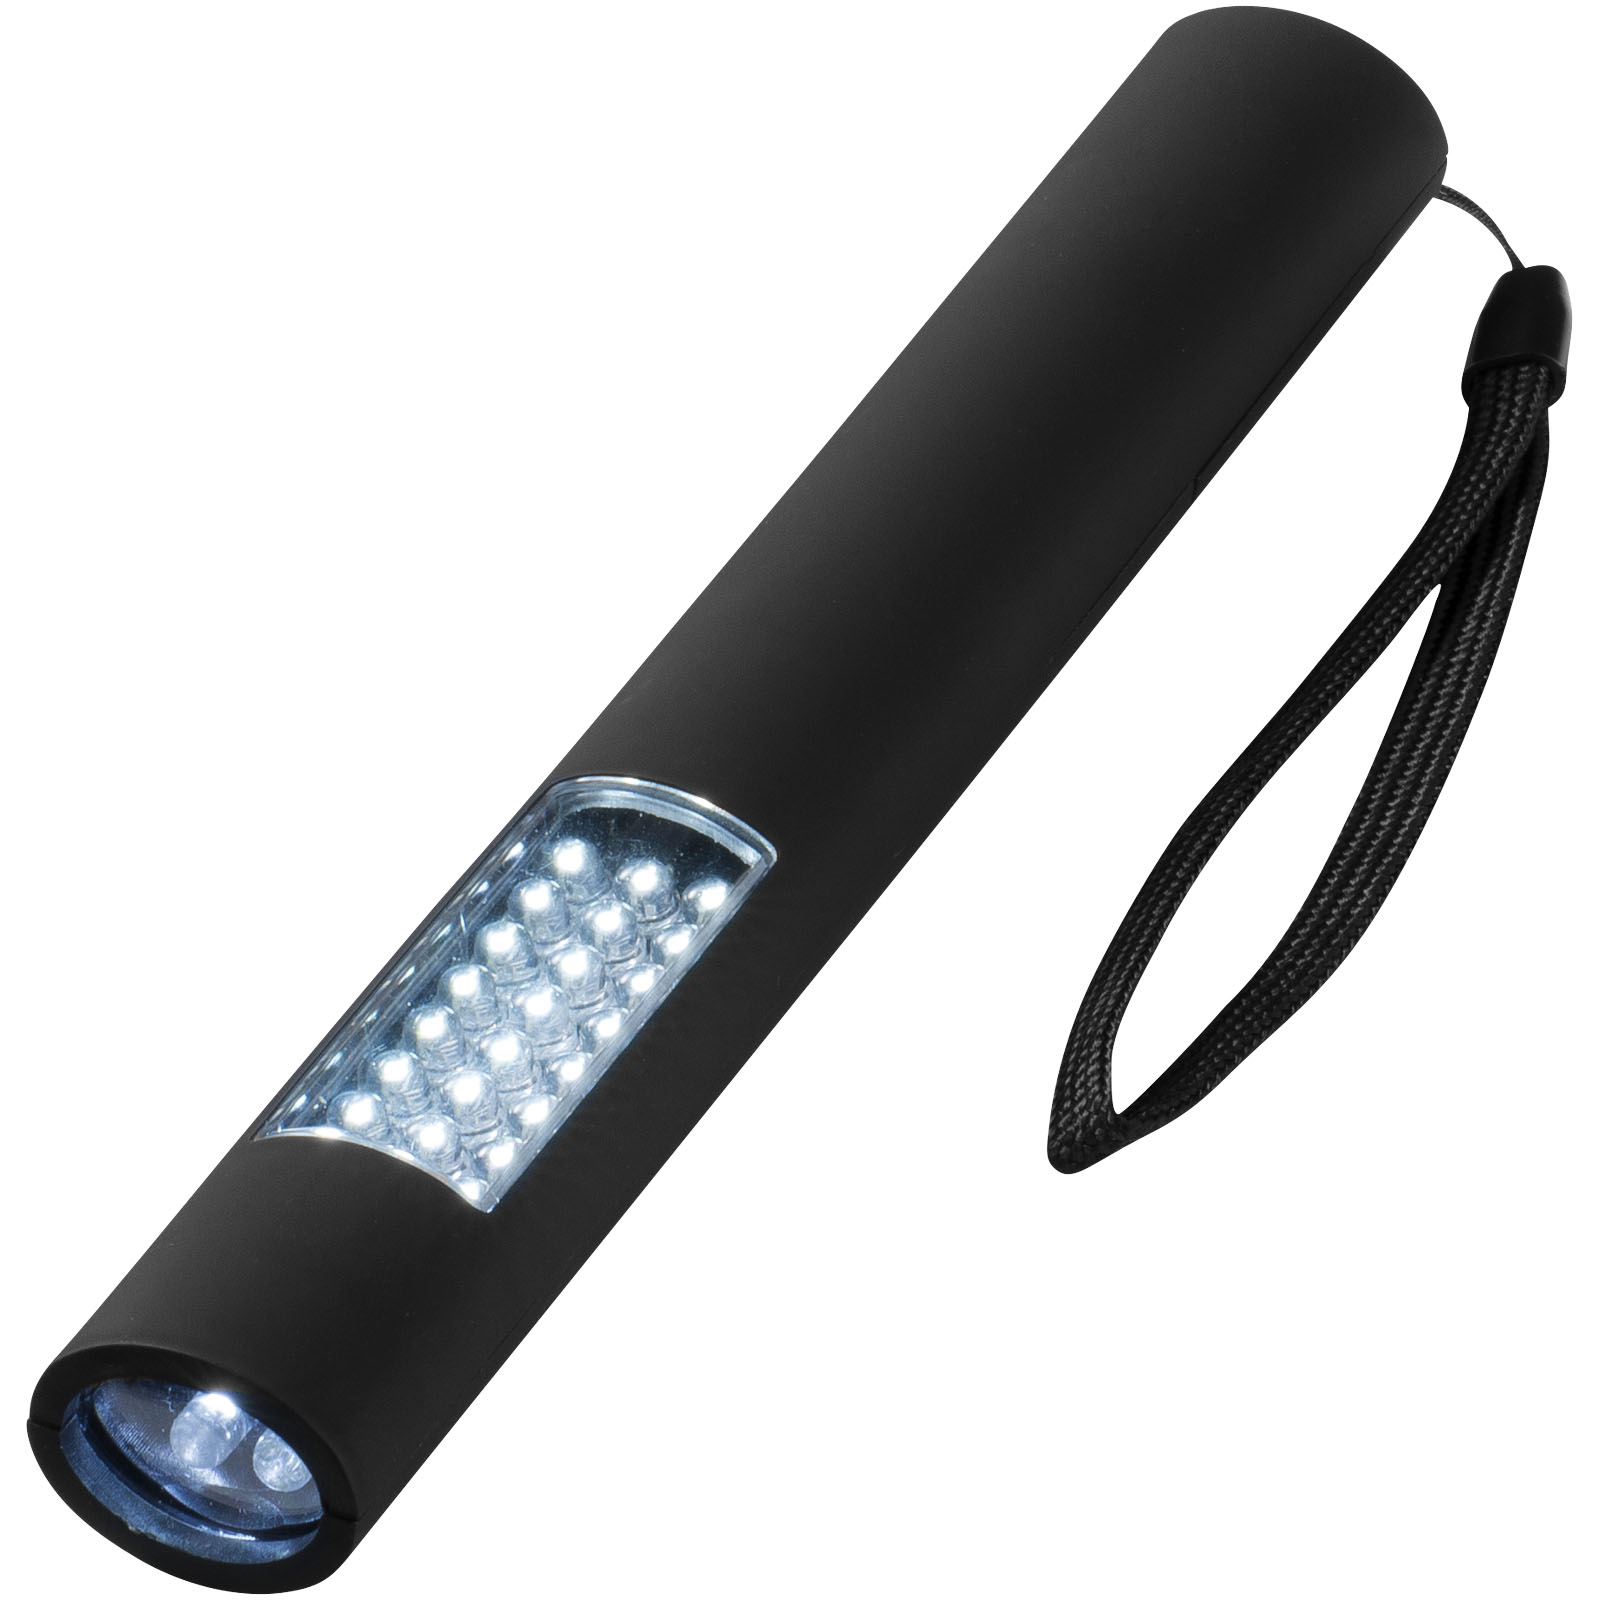 Lamps - Lutz 28-LED magnetic torch light